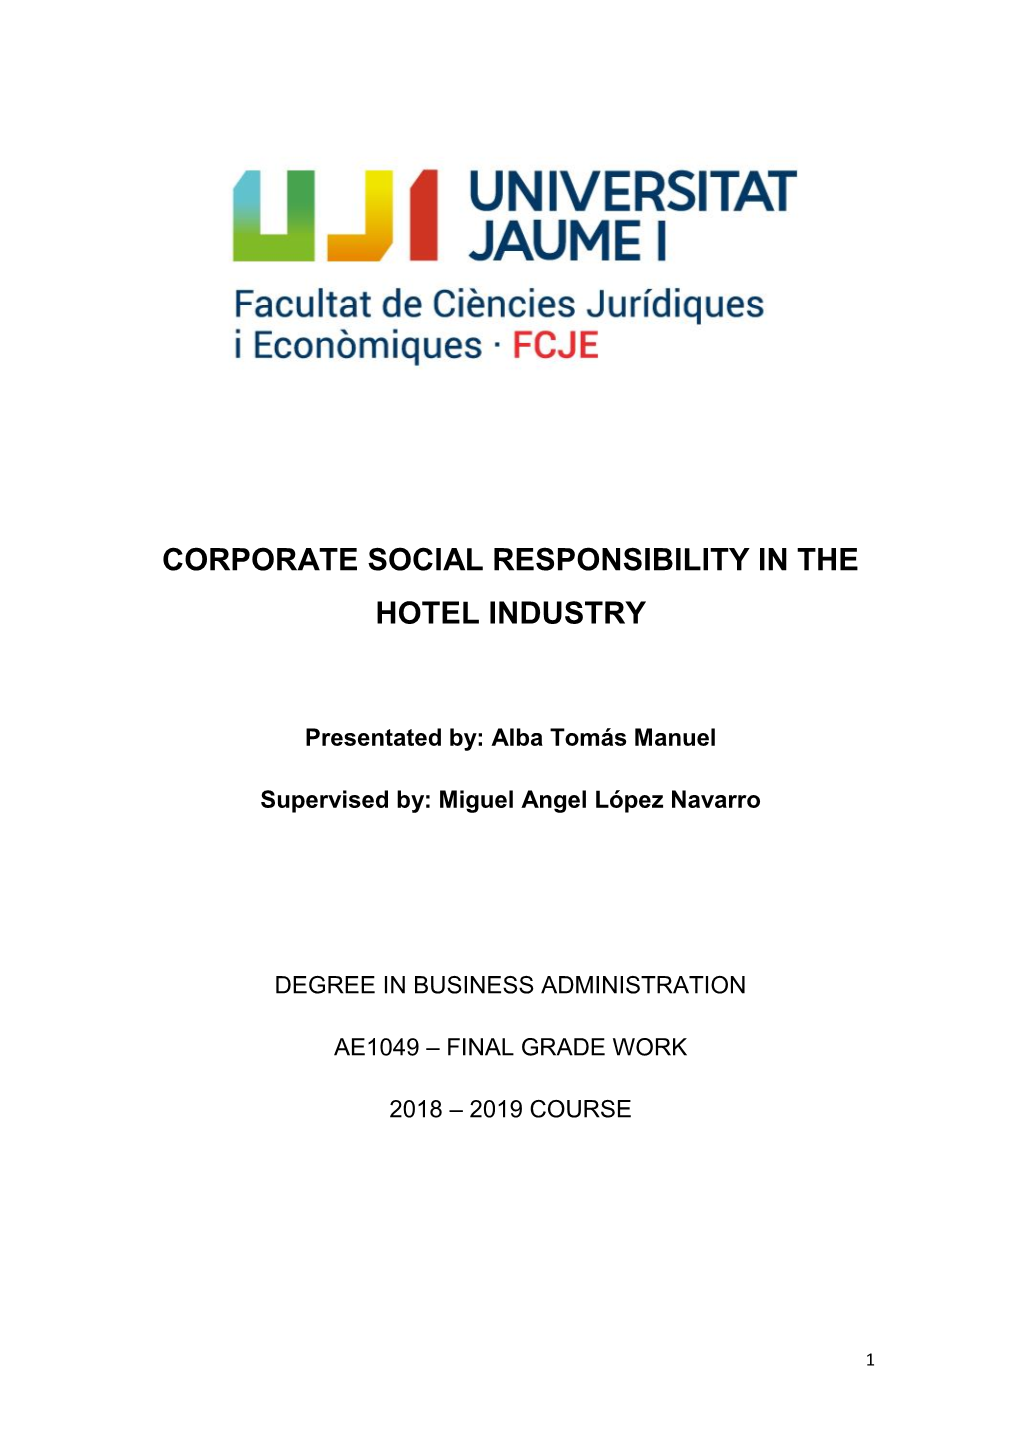 Corporate Social Responsibility in the Hotel Industry